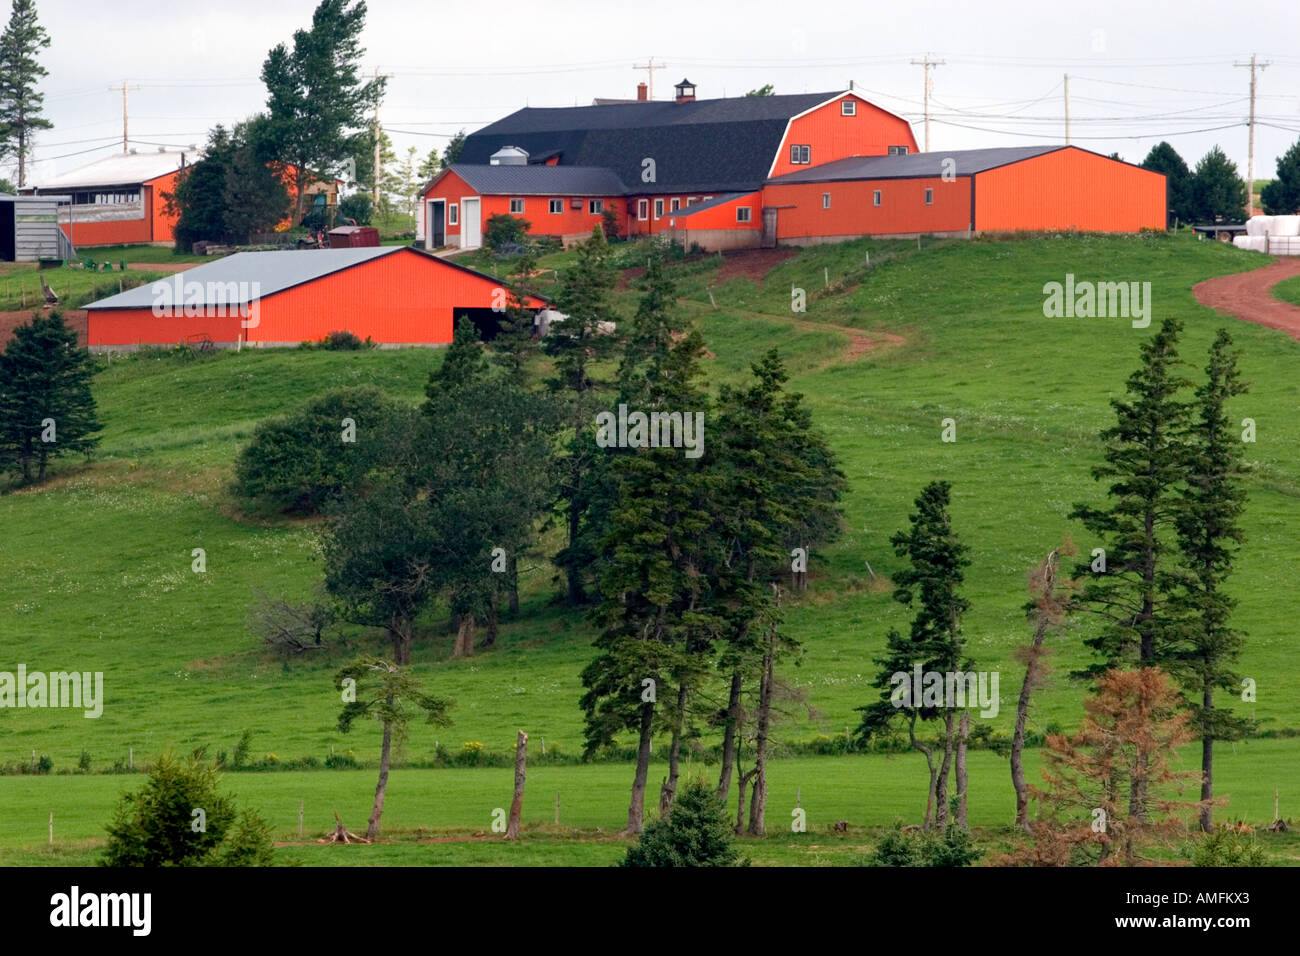 Farm and red barn on a hill at New Glasgow, Prince Edward Island, Canada. Stock Photo